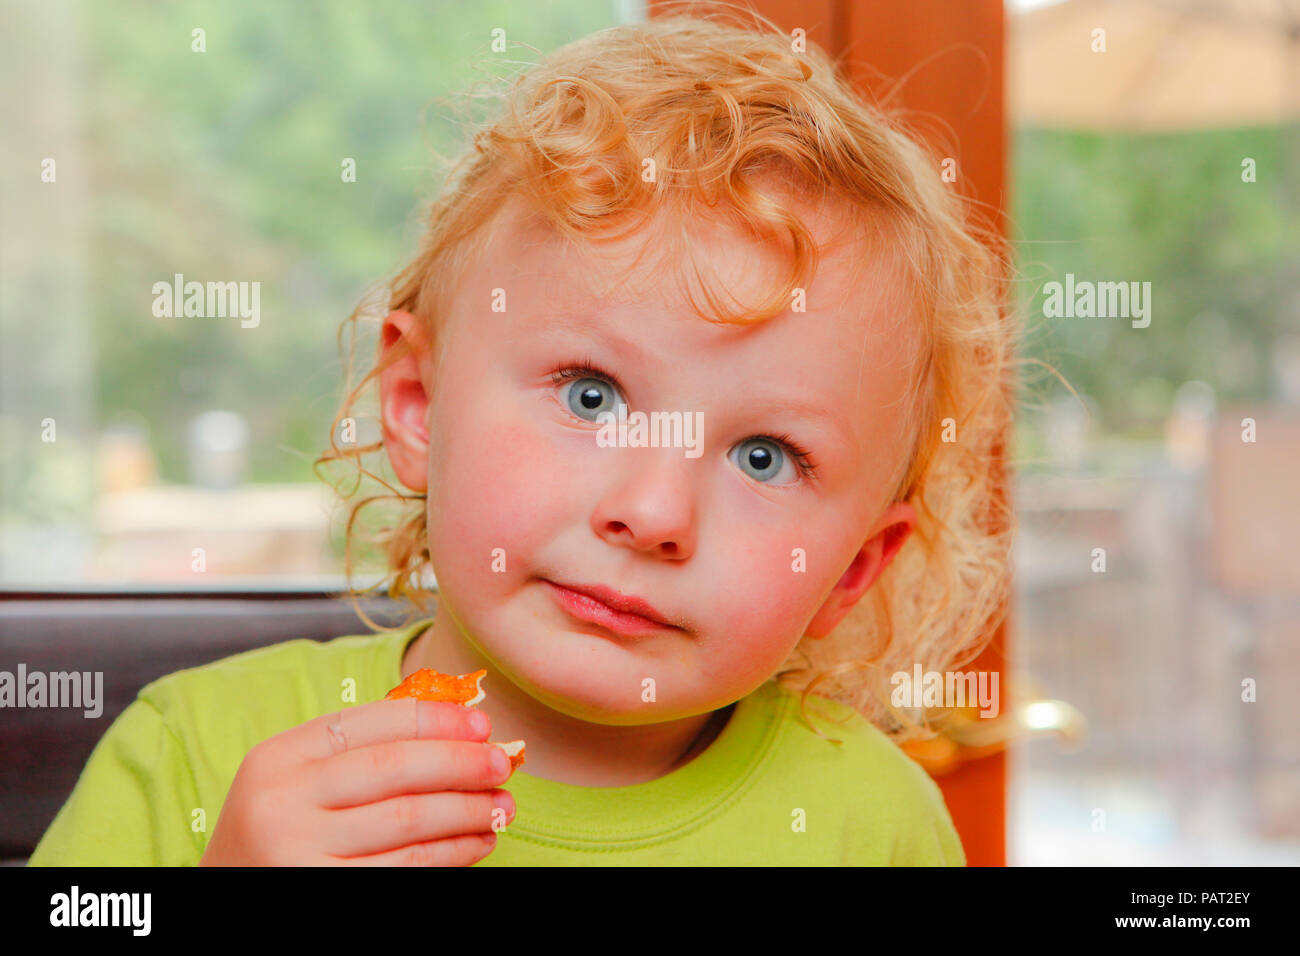 Cute Child eating a snack Stock Photo